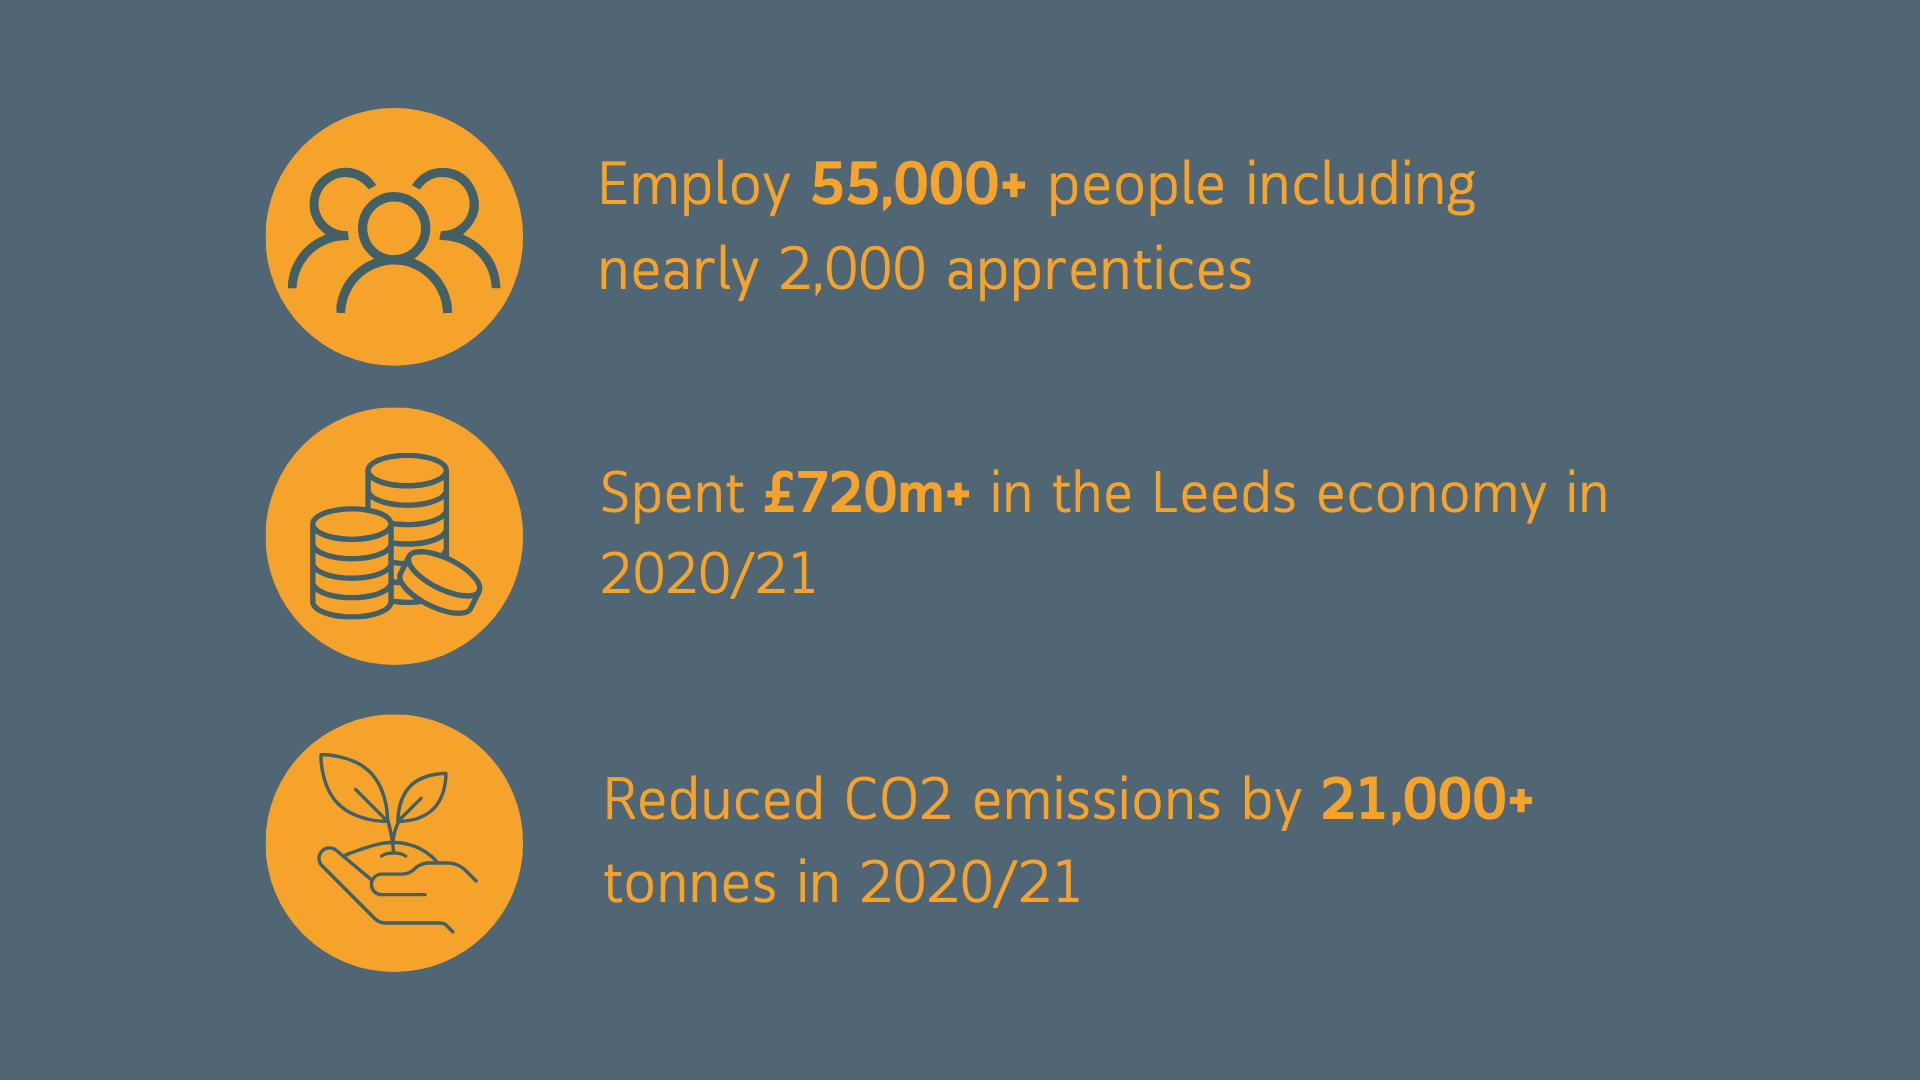 An infographic with three lines of yellow text against a grey background. The first icon shows people and reads "Employ 55,000+ people including nearly 2,000 apprentices". The second icon shows money and reads "Spent £720m+ in the Leeds economy in 2020/21". The third icon shows a plant and reads "Reduced CO2 emissions by 21,000+ tonnes in 2020/21".